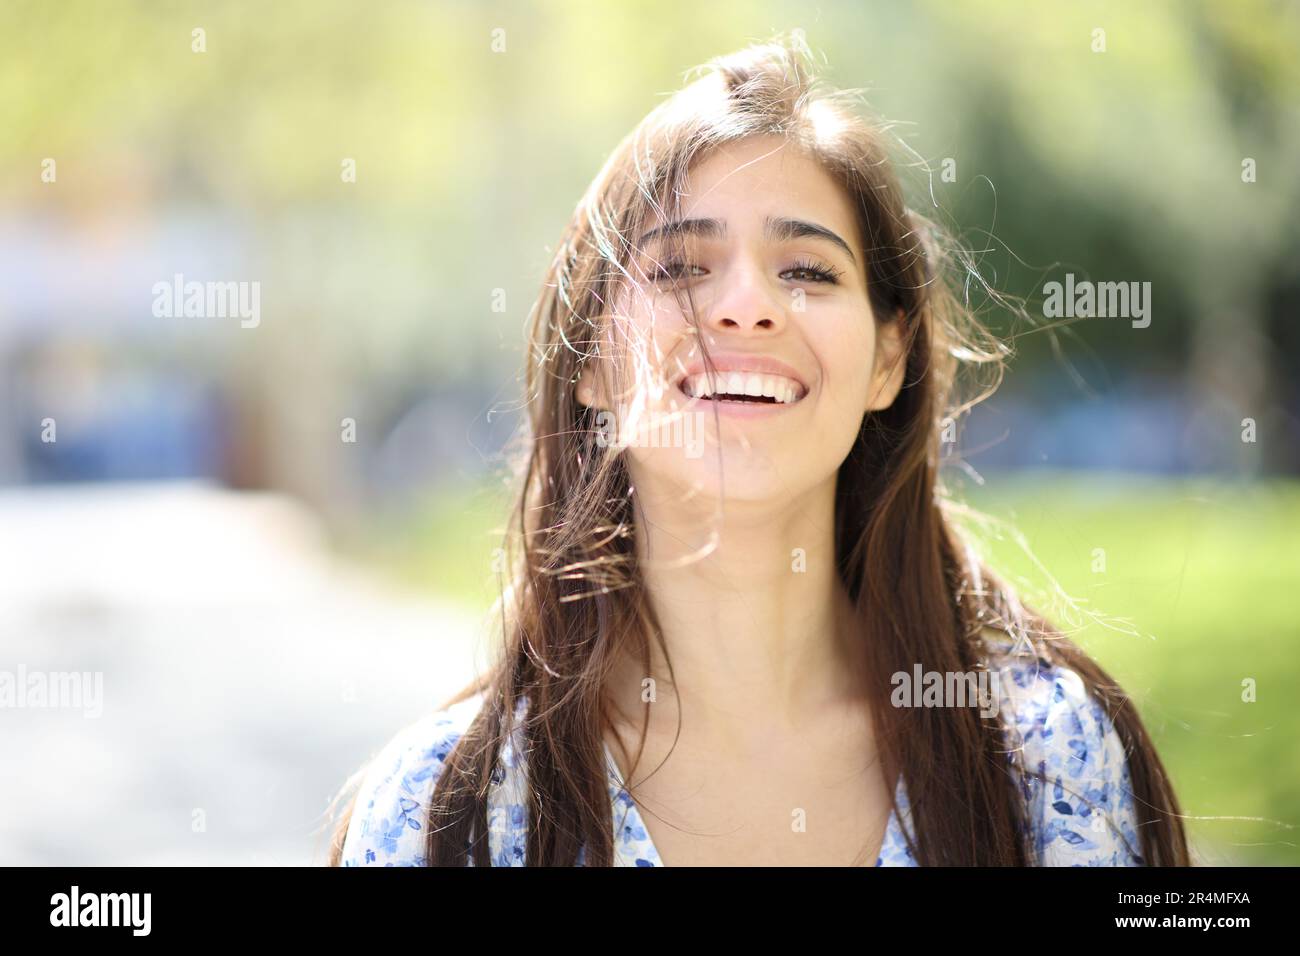 Front view portrait of a happy woman laughing with tousled hair a windy day Stock Photo